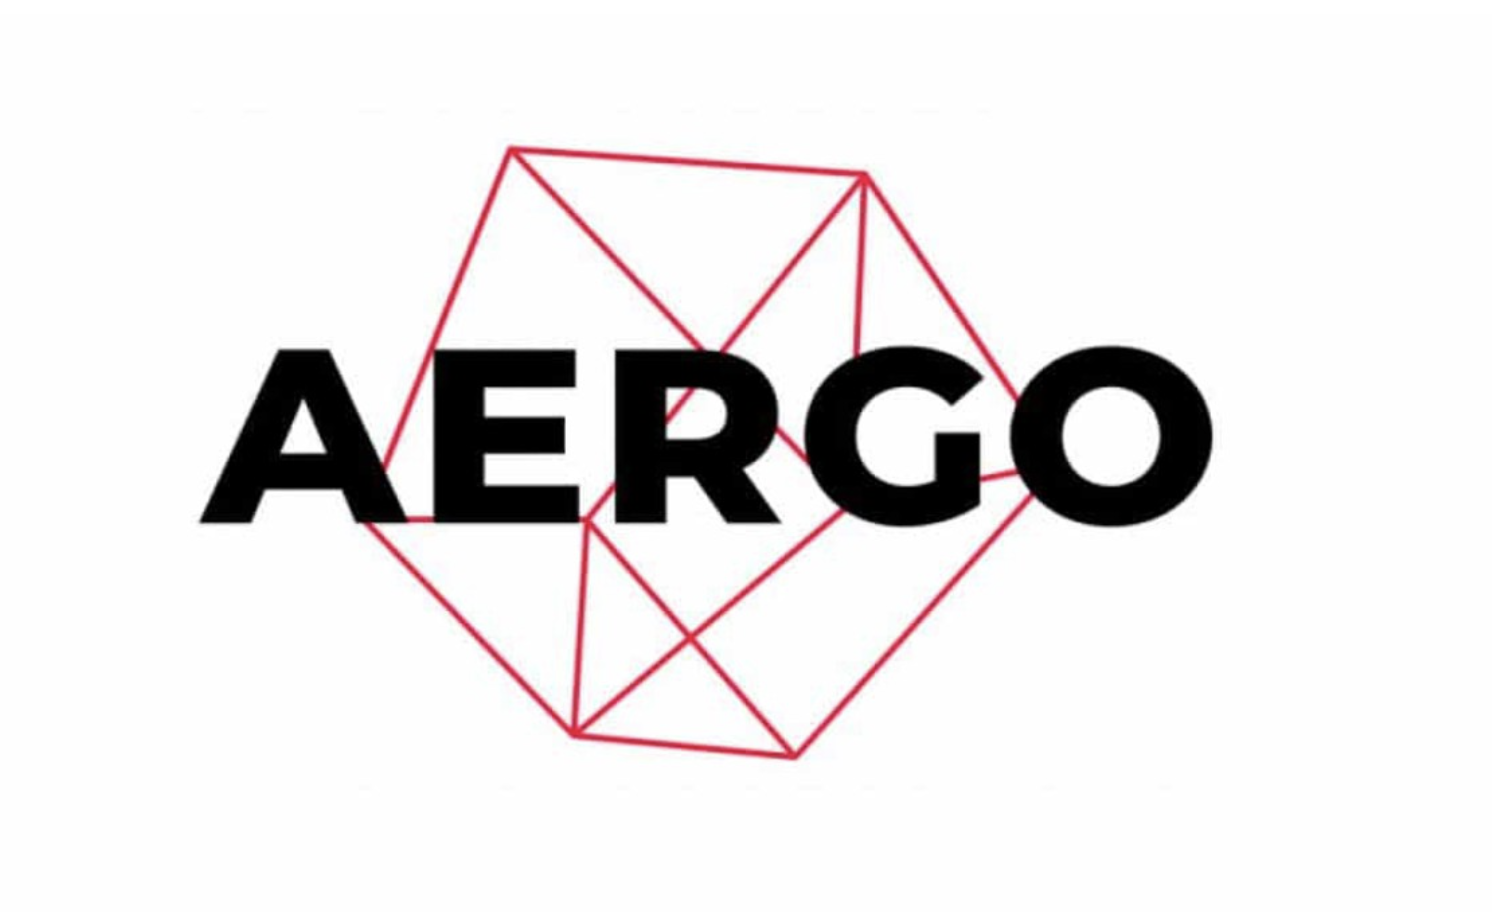 How to Buy AERGO Coin?